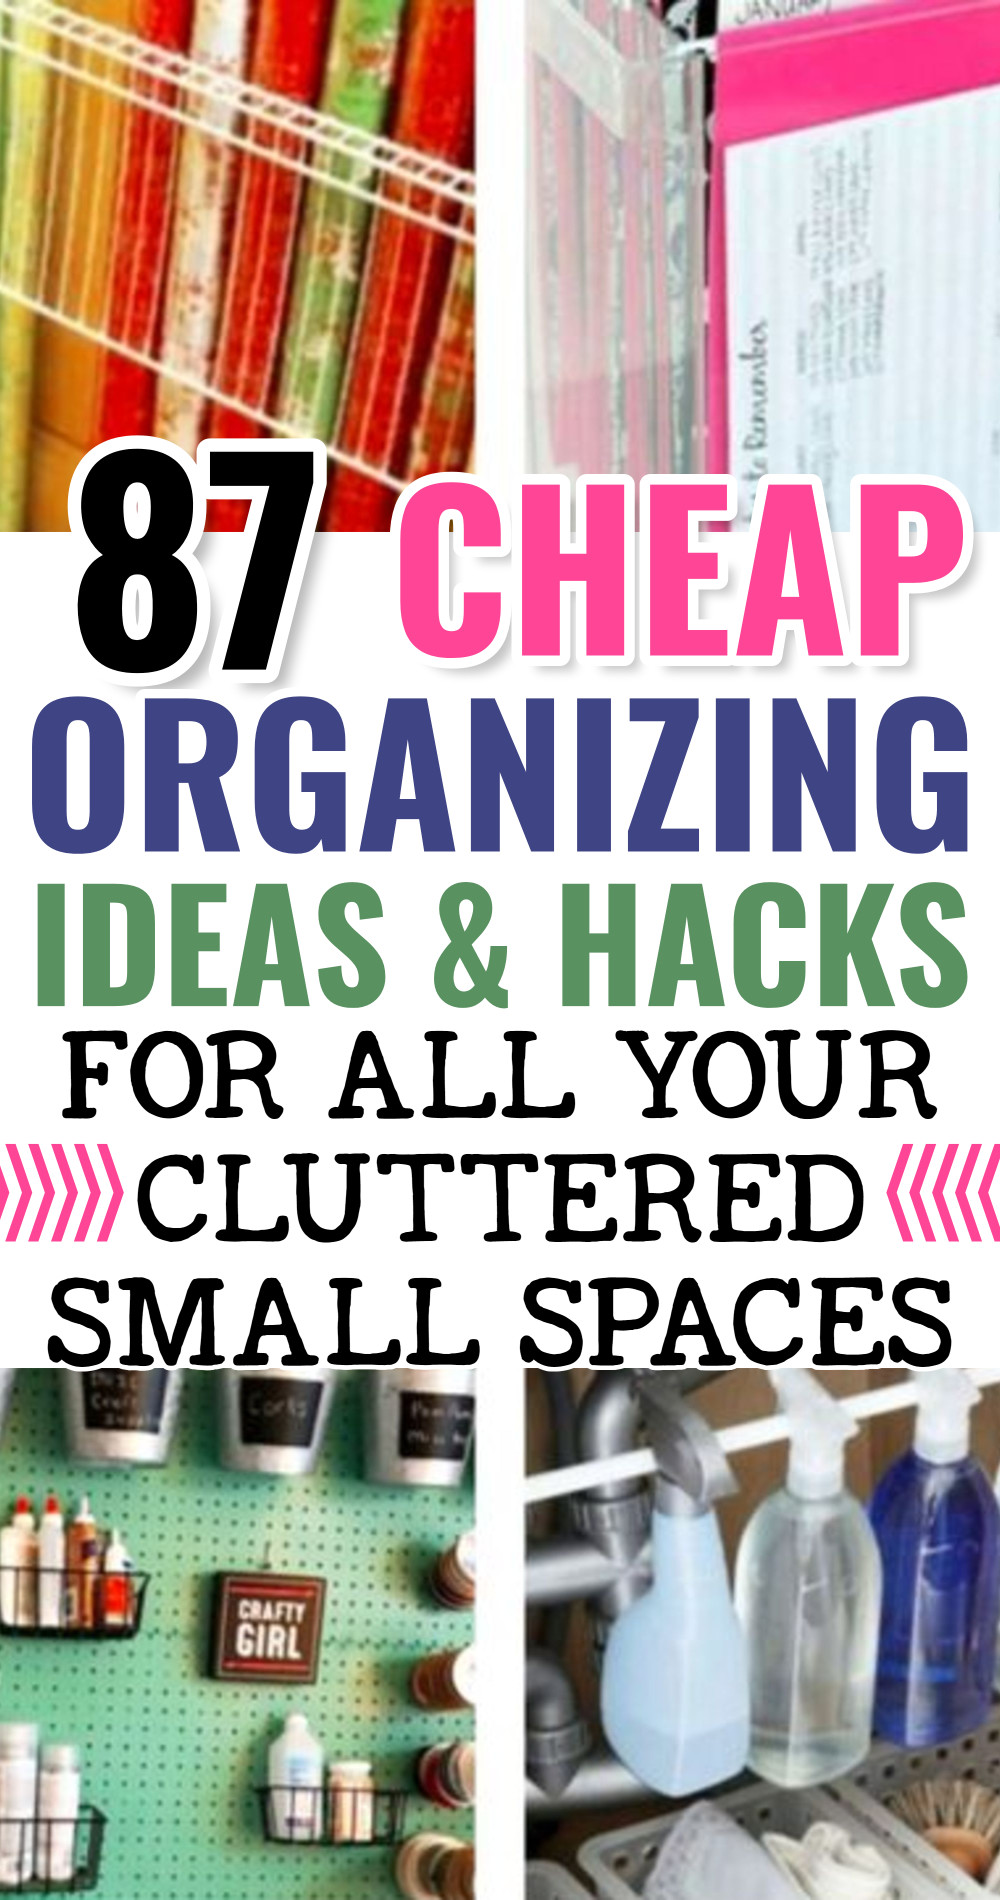 cheap organizing ideas and hacks for all your cluttered small spaces